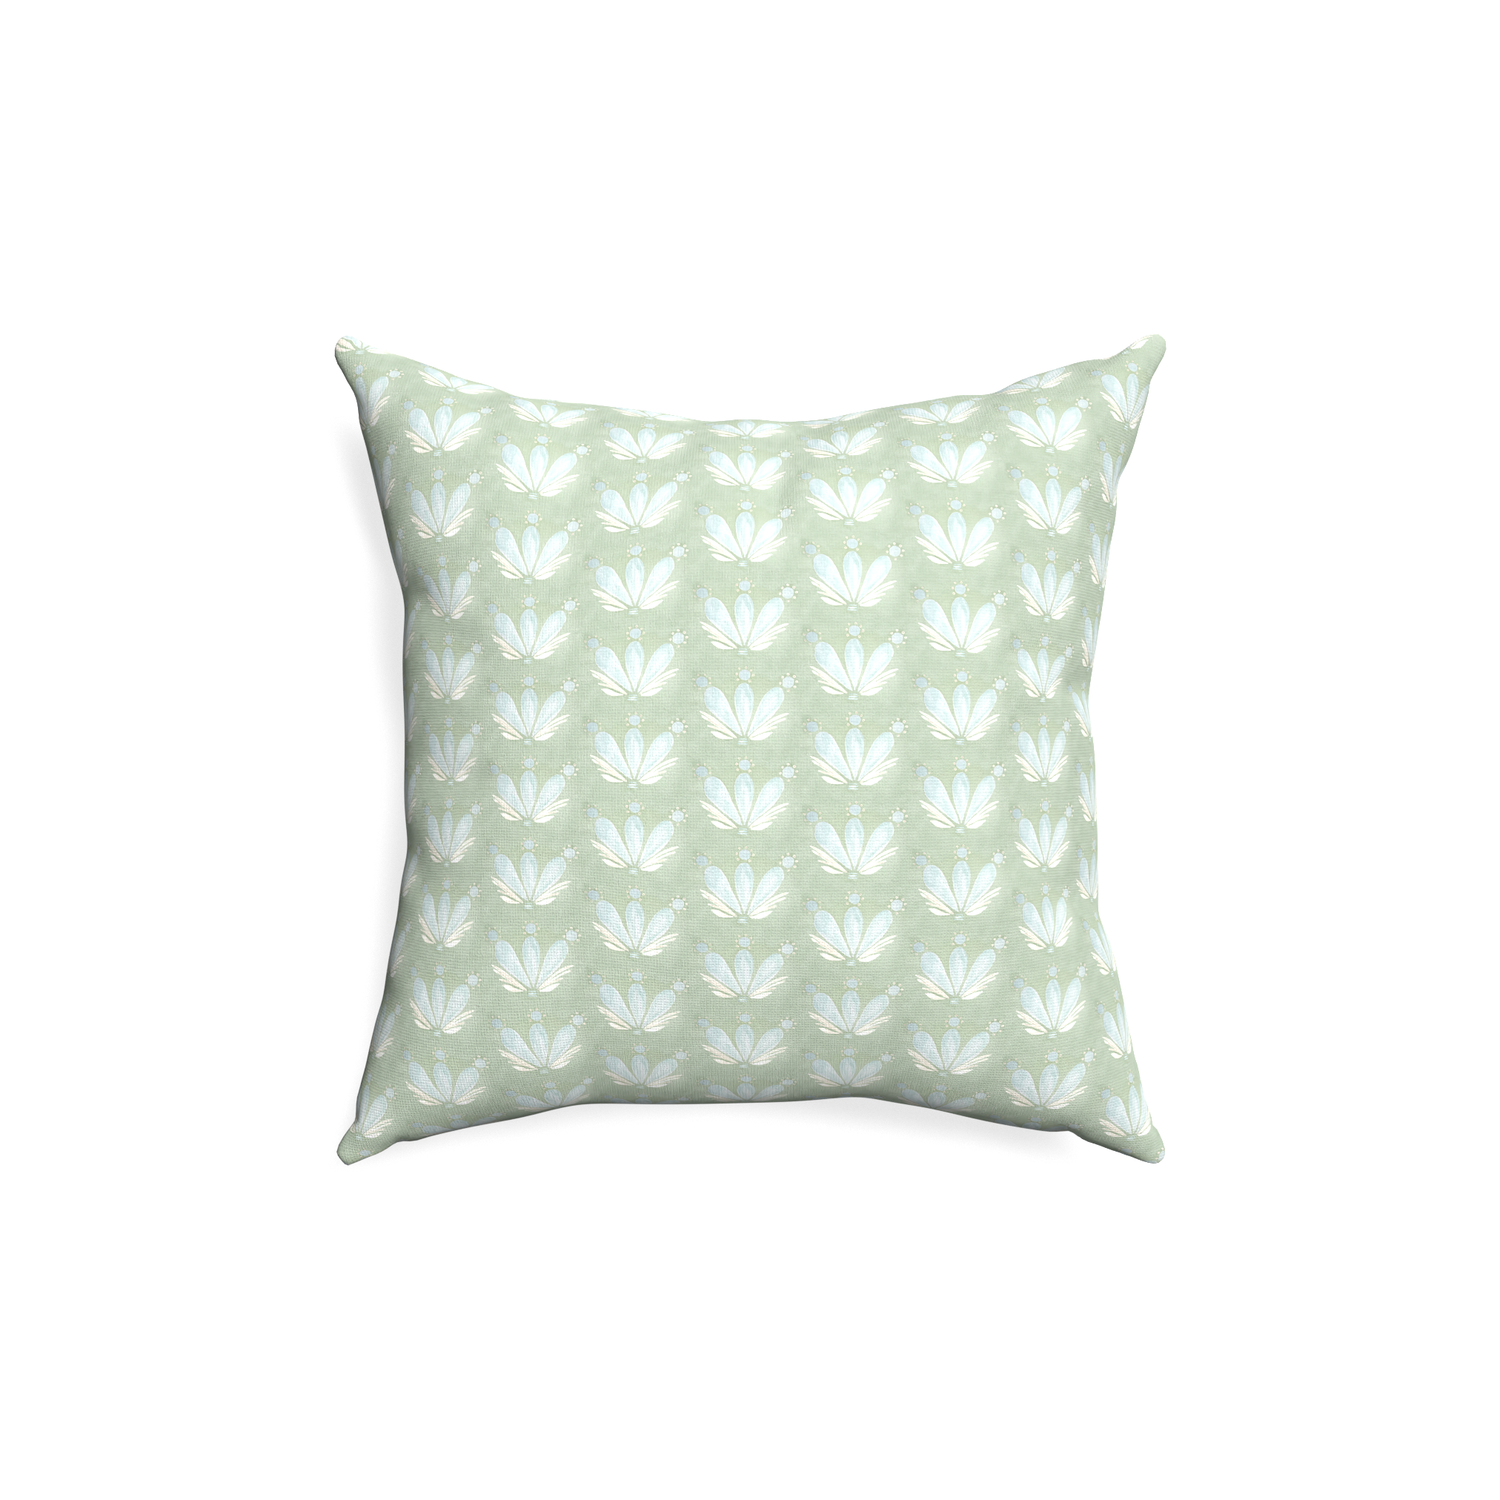 18-square serena sea salt custom blue & green floral drop repeatpillow with none on white background